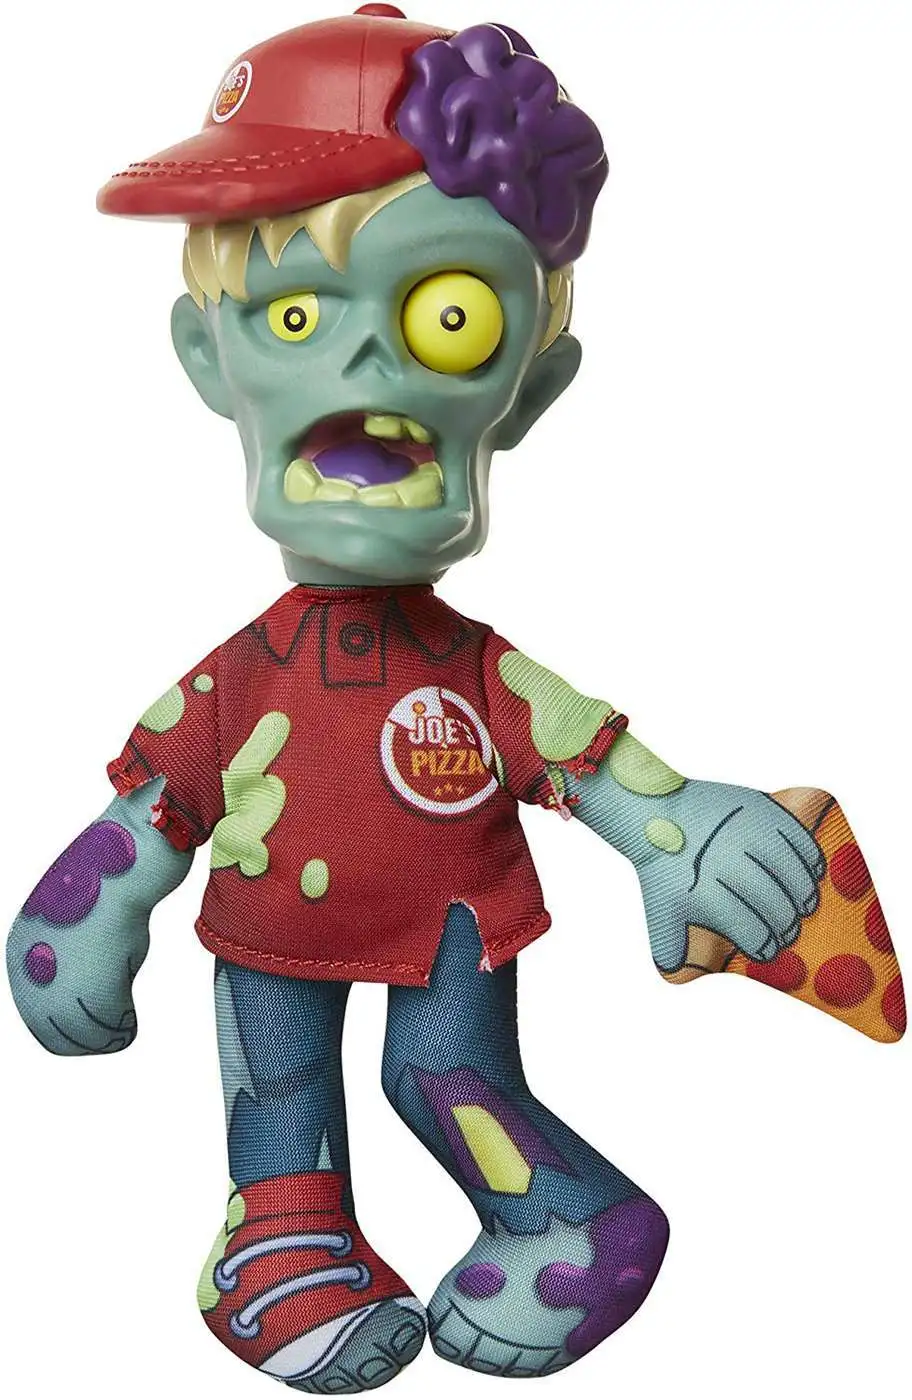 OCT198073 - LAST KIDS ON EARTH ZOMBIE PLUSH ASST 202001 - Previews